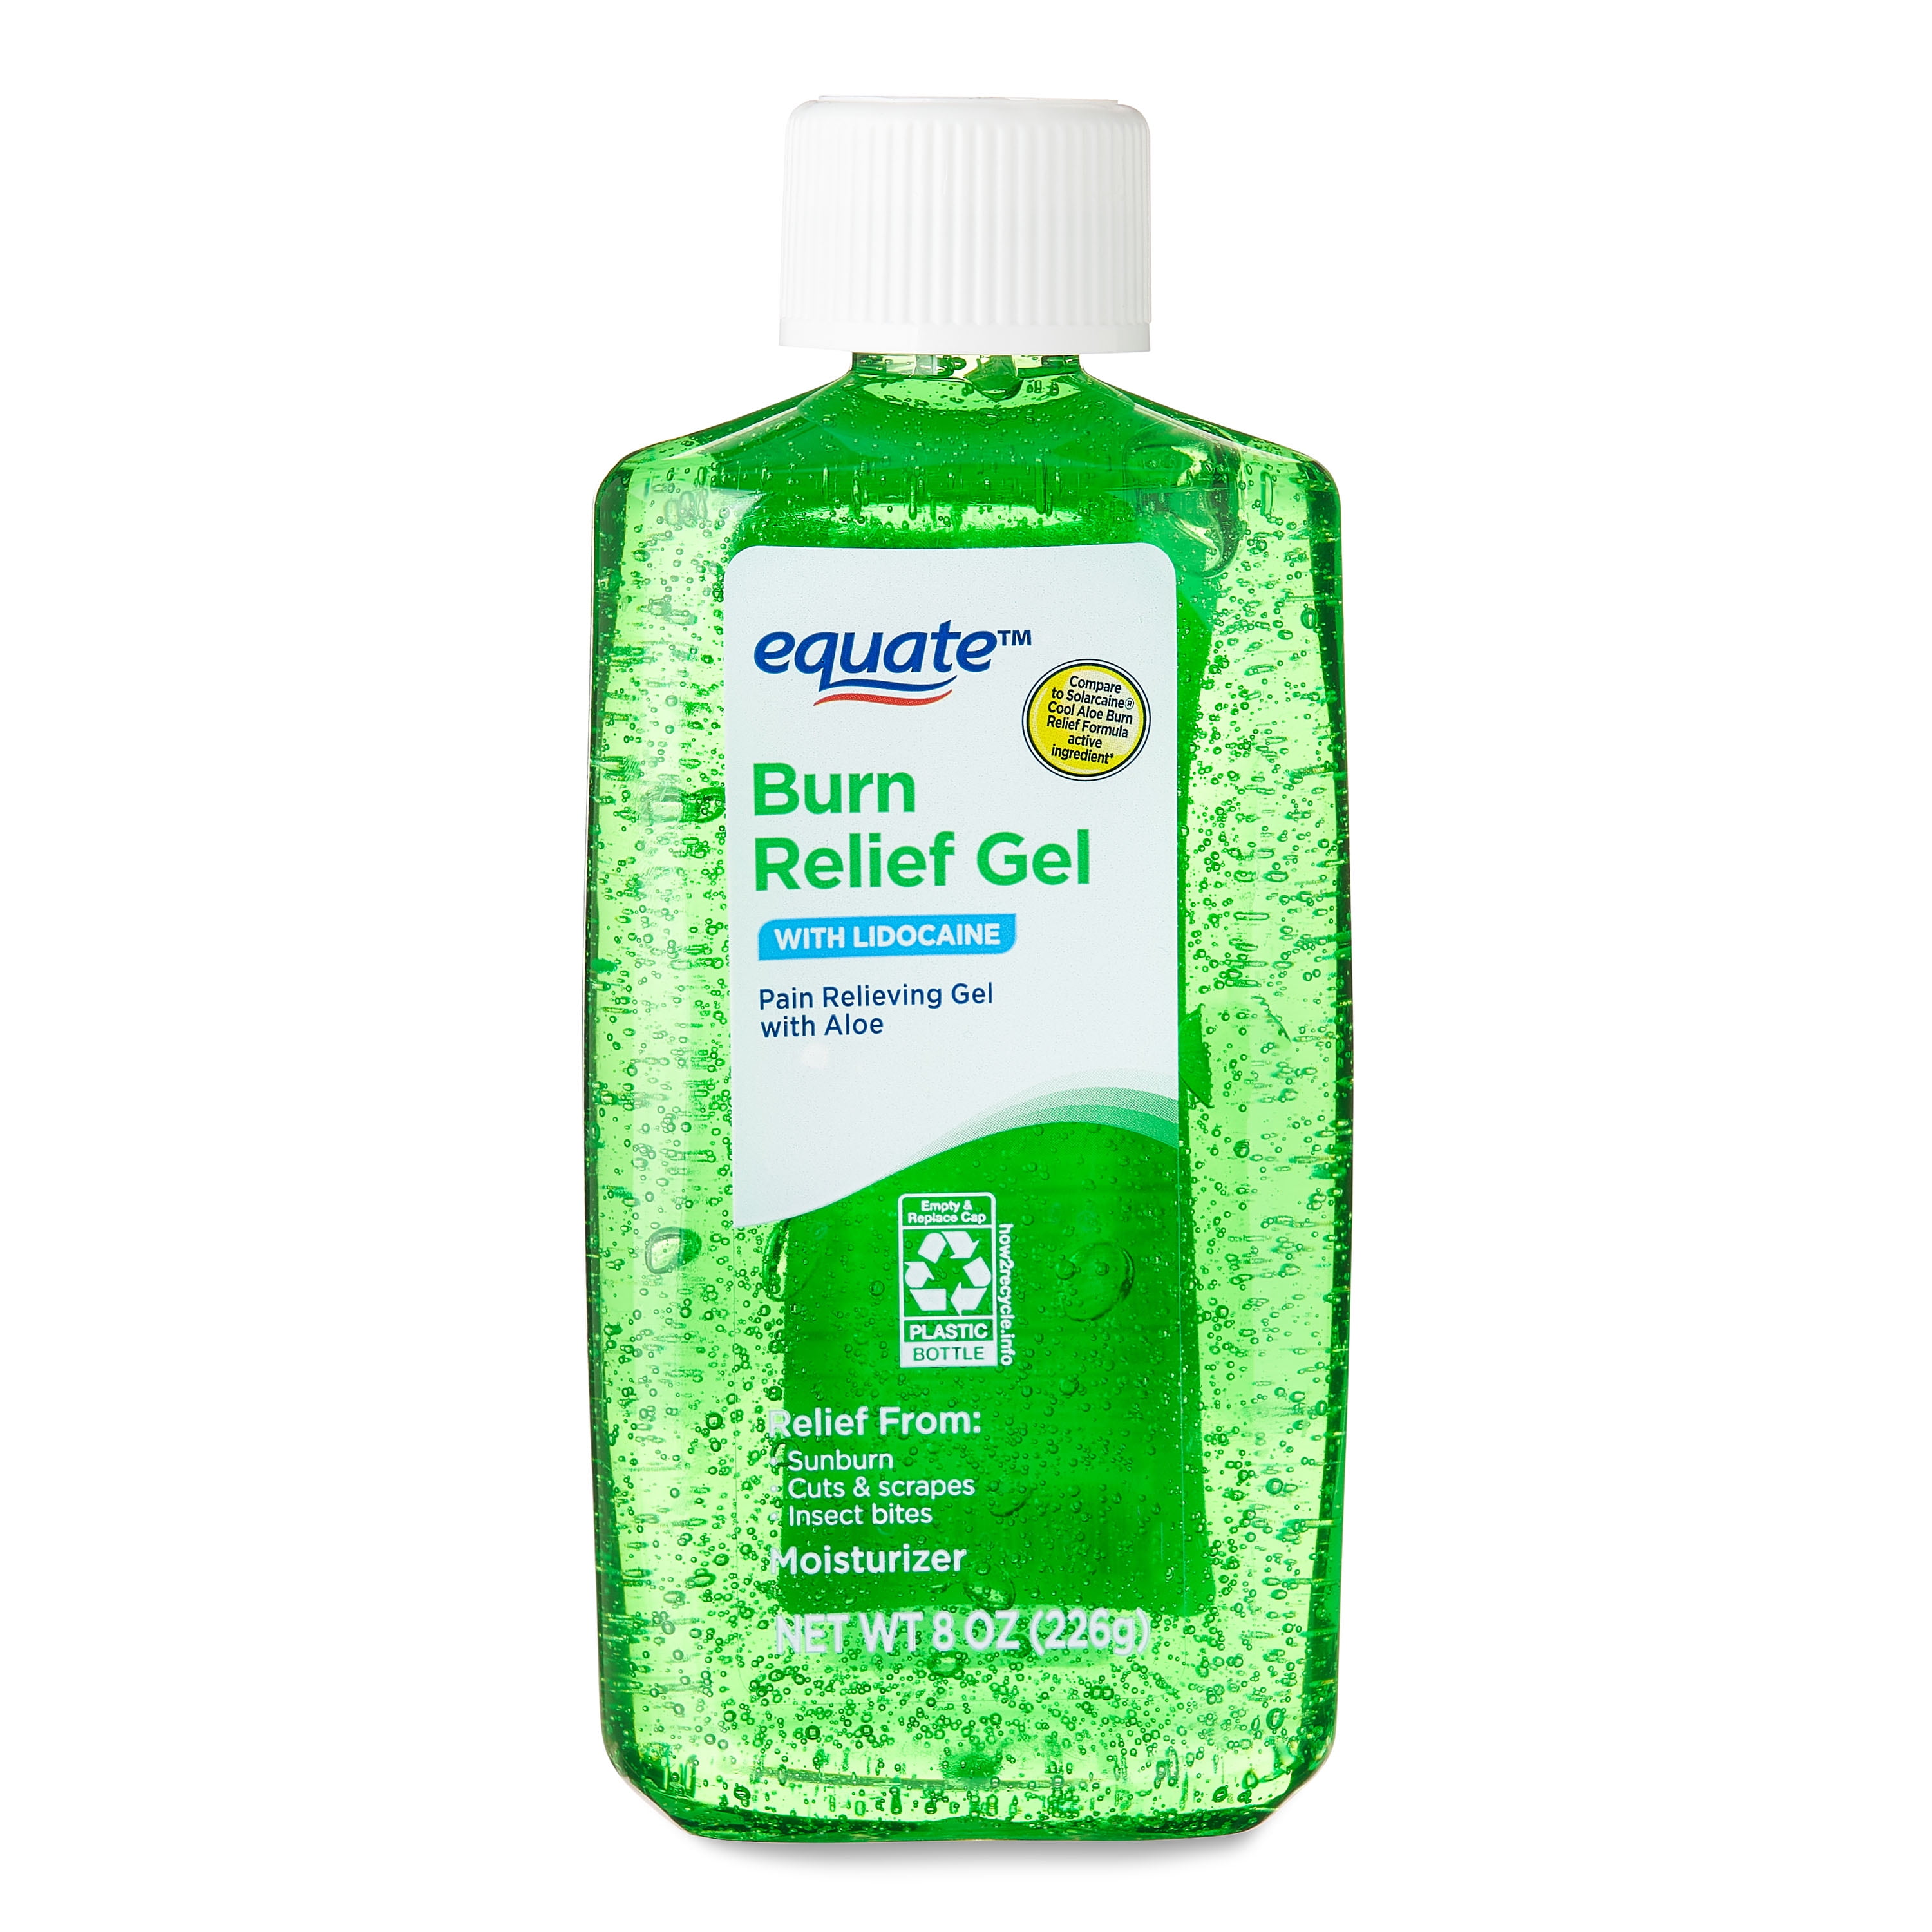 Equate Burn Relief Gel with Lidocaine, 8 oz